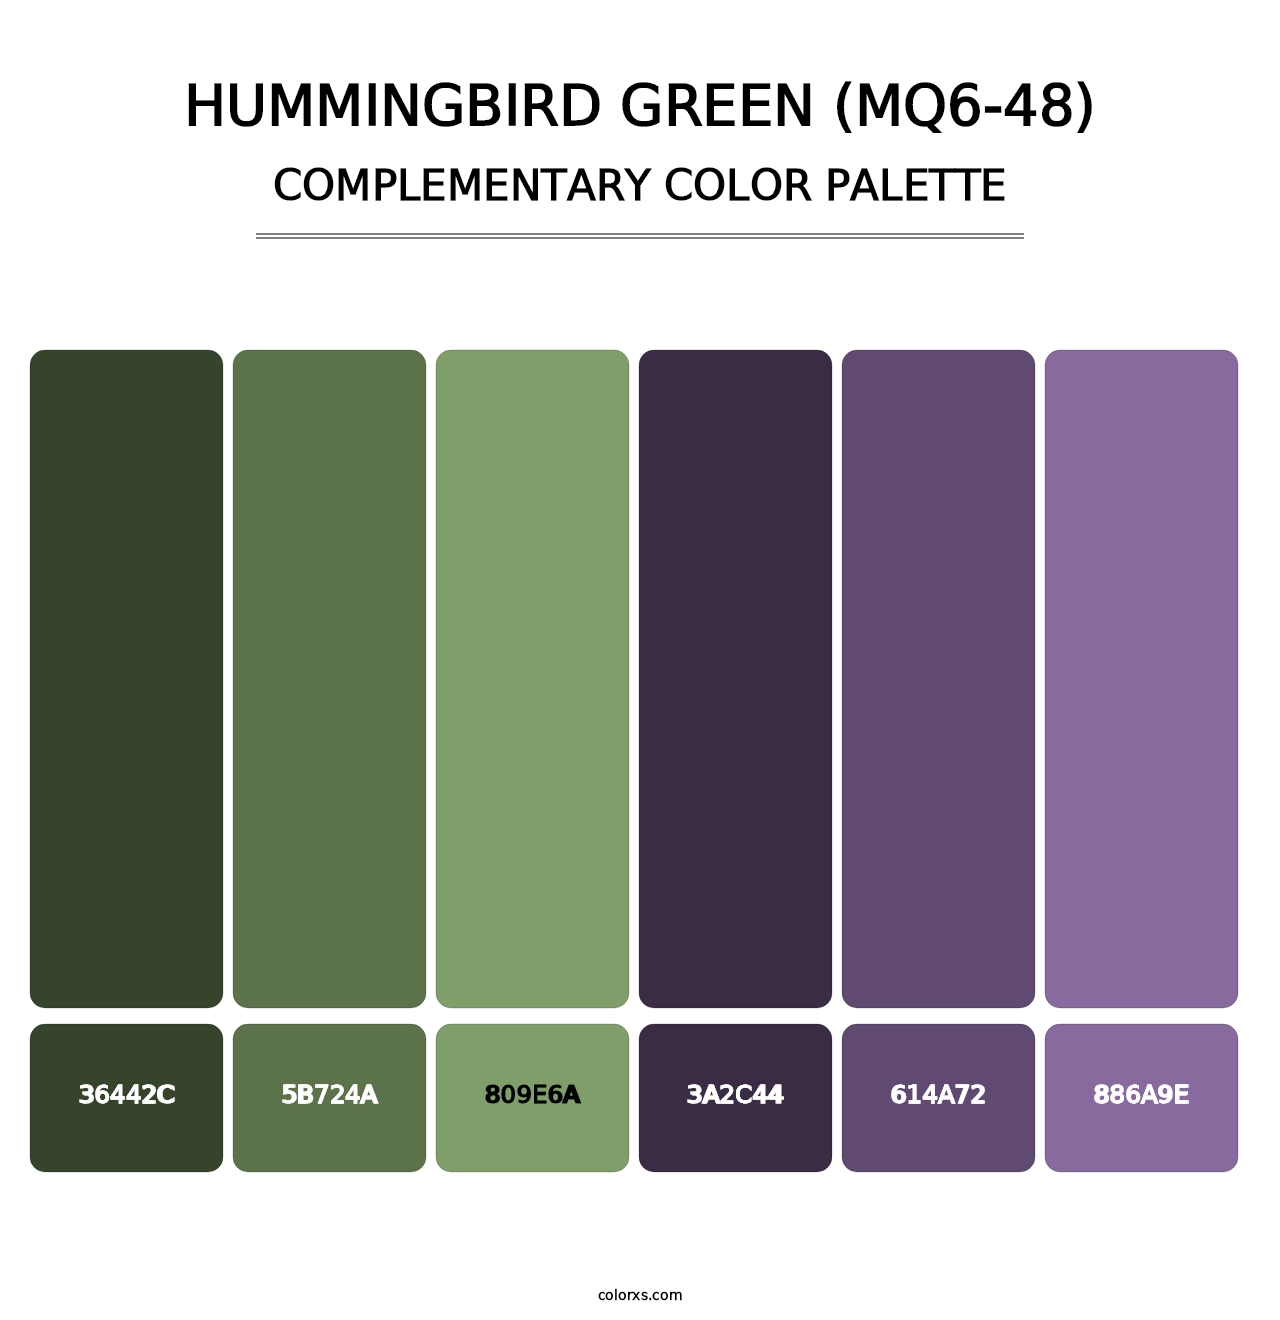 Hummingbird Green (MQ6-48) - Complementary Color Palette